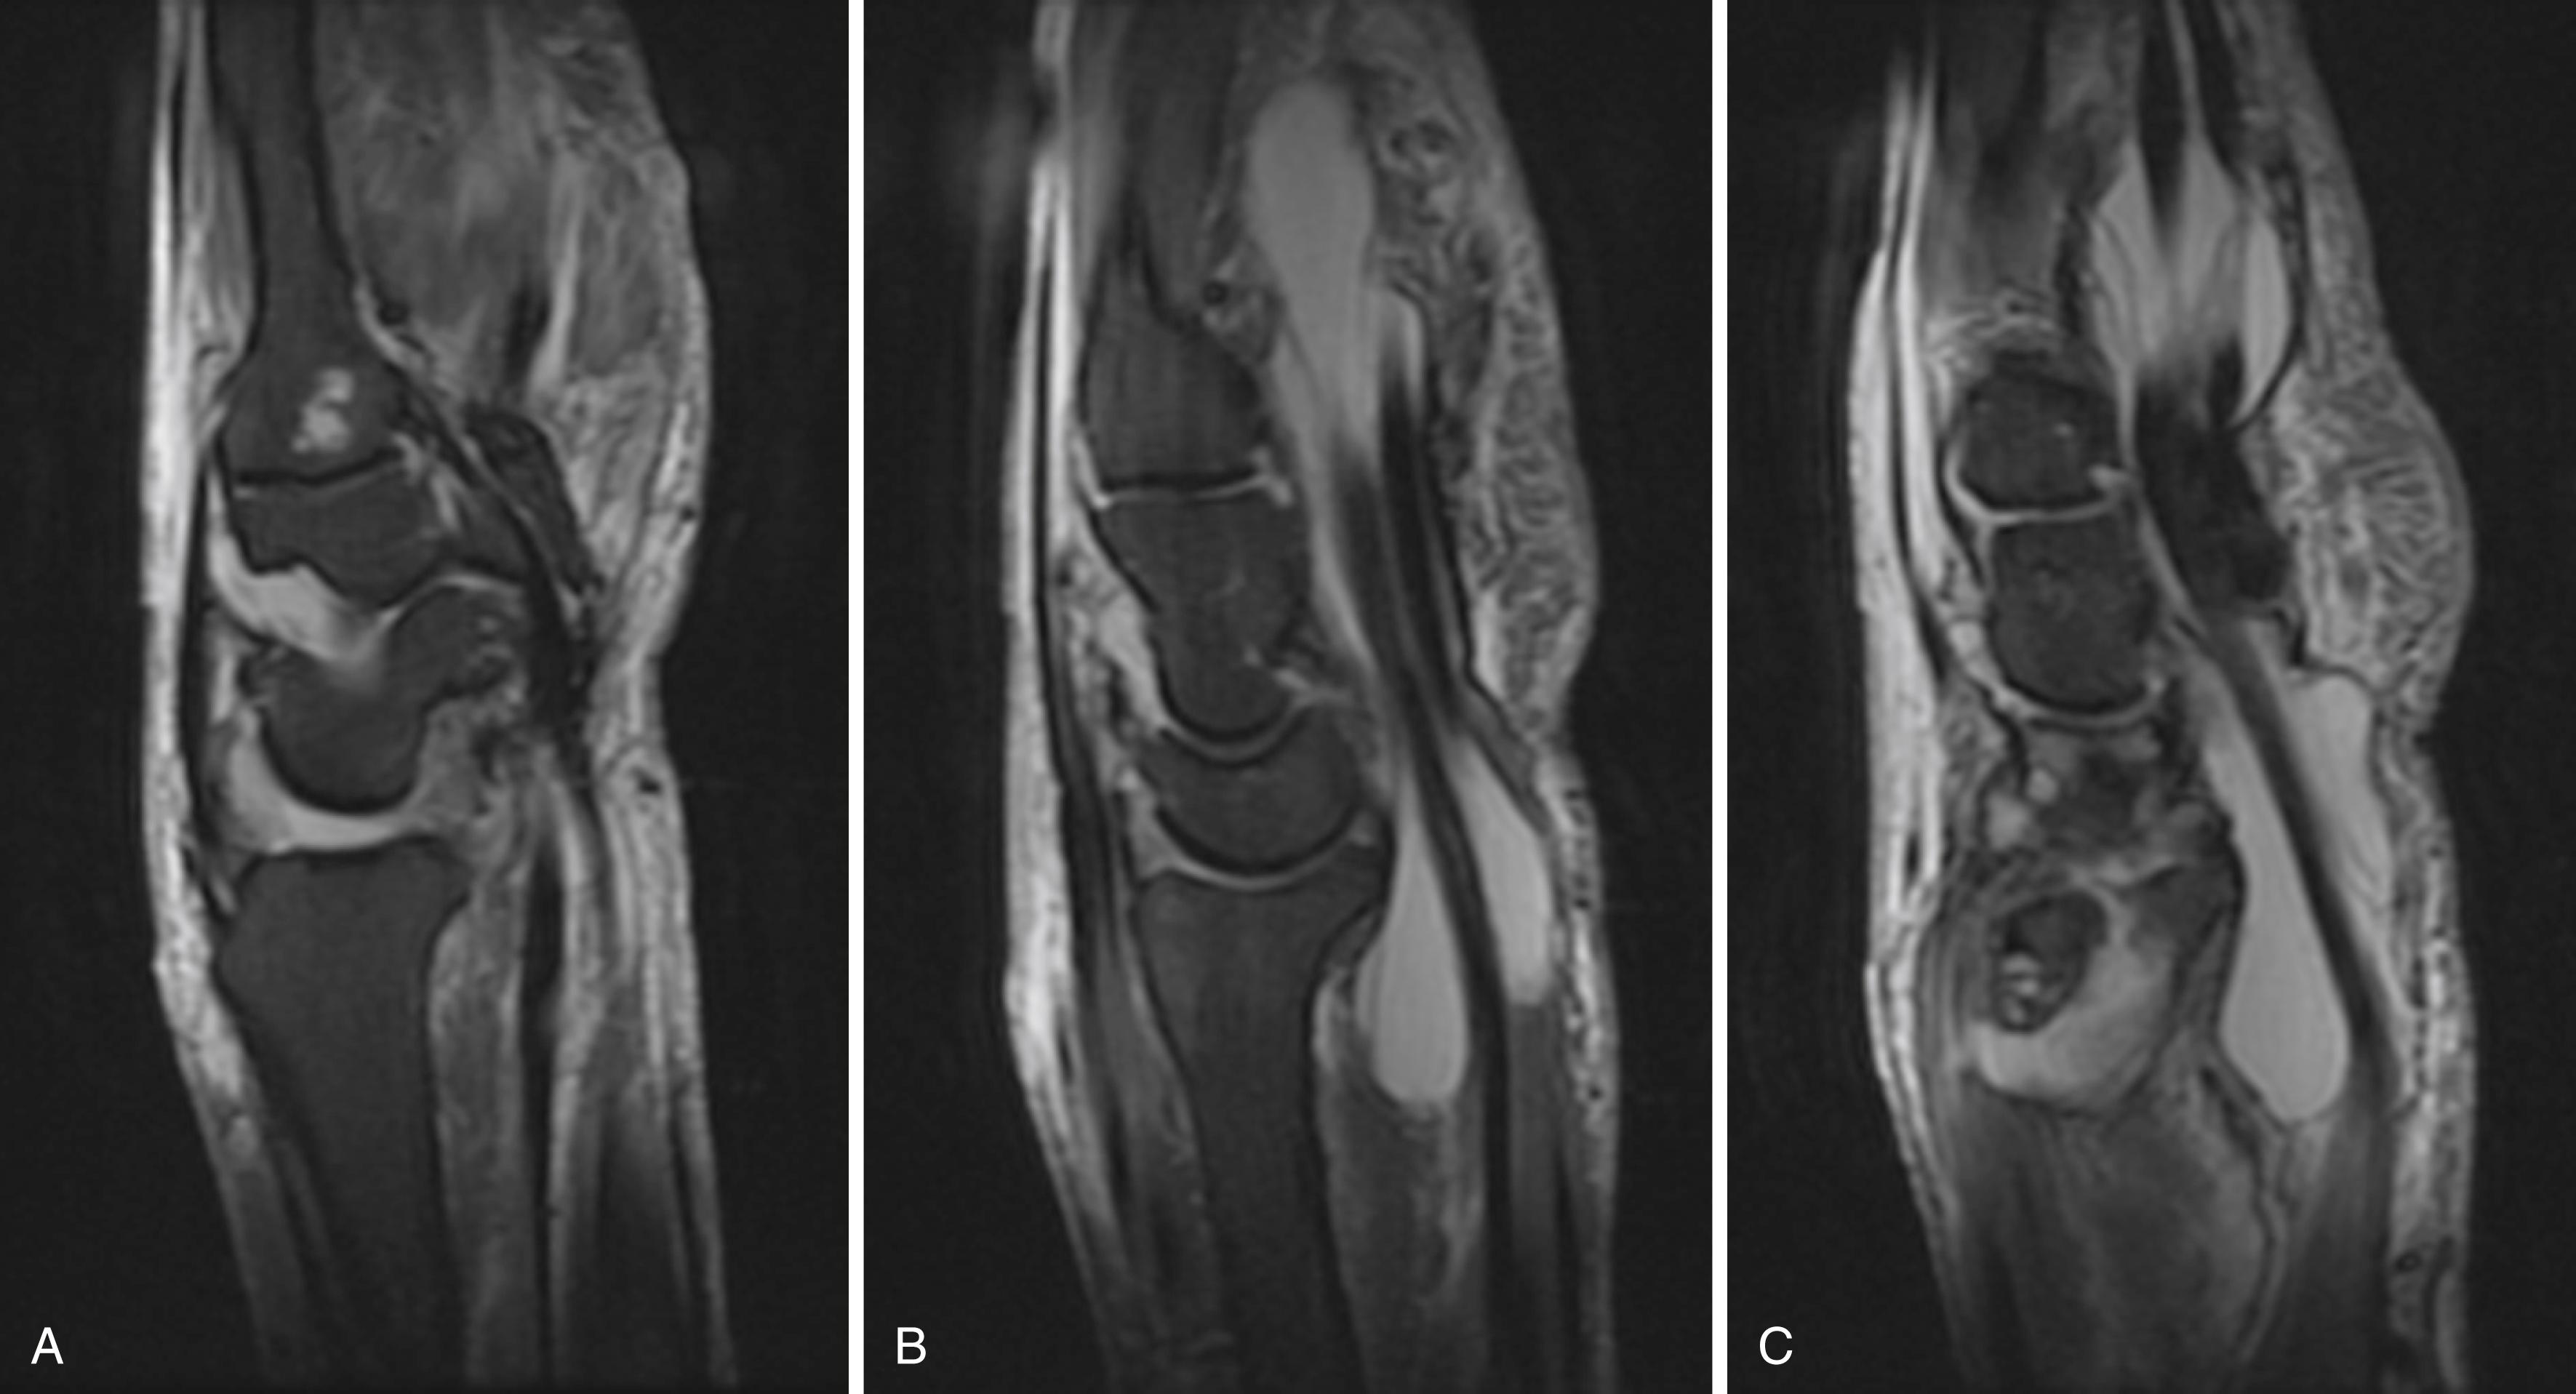 eFig. 2.3, A to C, Sagittal MRI imaging showing fluid in all three compartments of the wrist and within the flexor tendon sheaths.